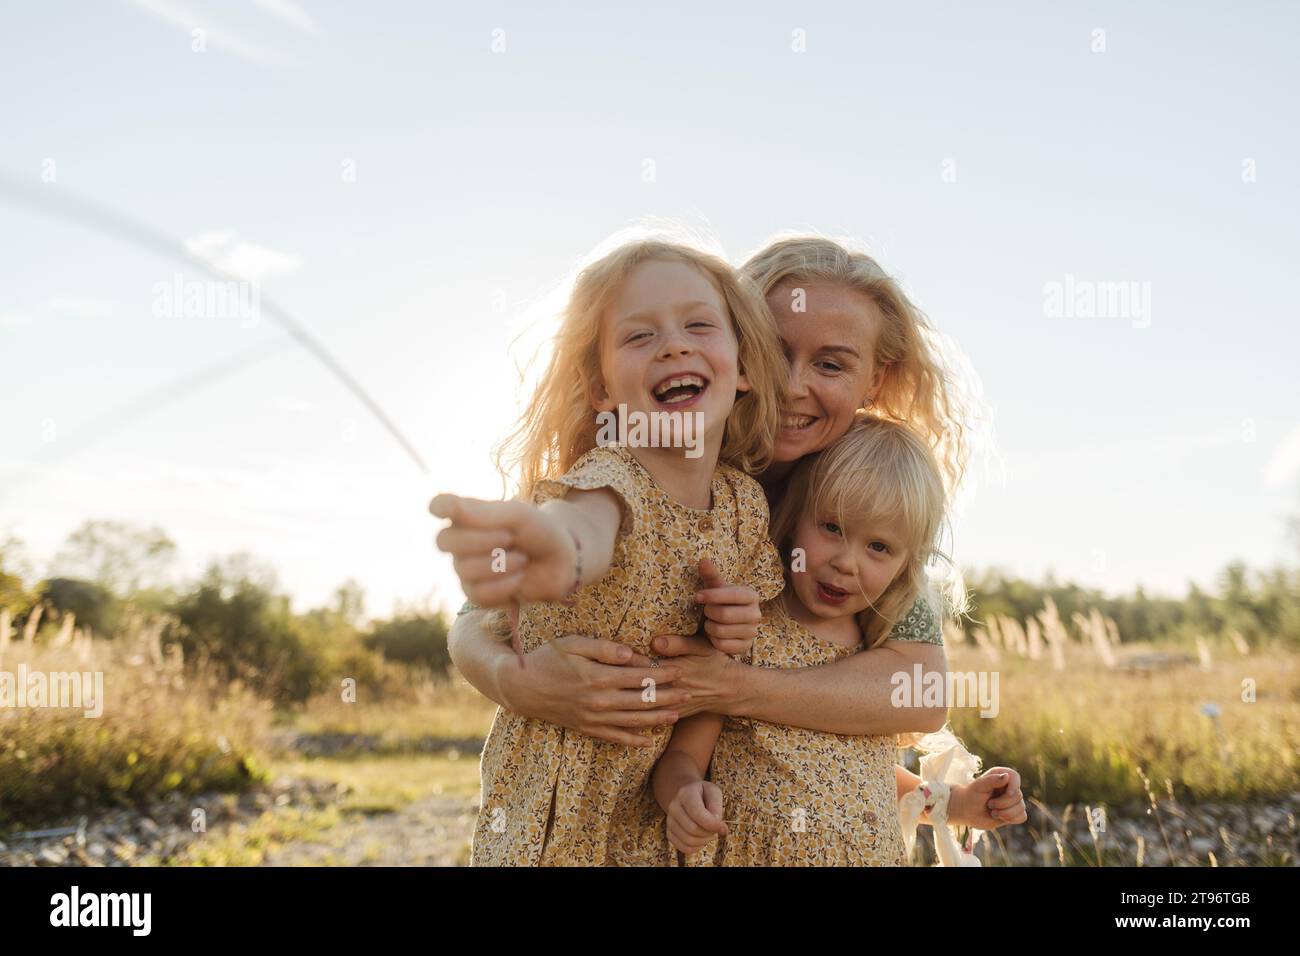 Happy young blond haired woman hugging cute little girls wearing matching dresses and looking at camera against sunlight in countryside Stock Photo